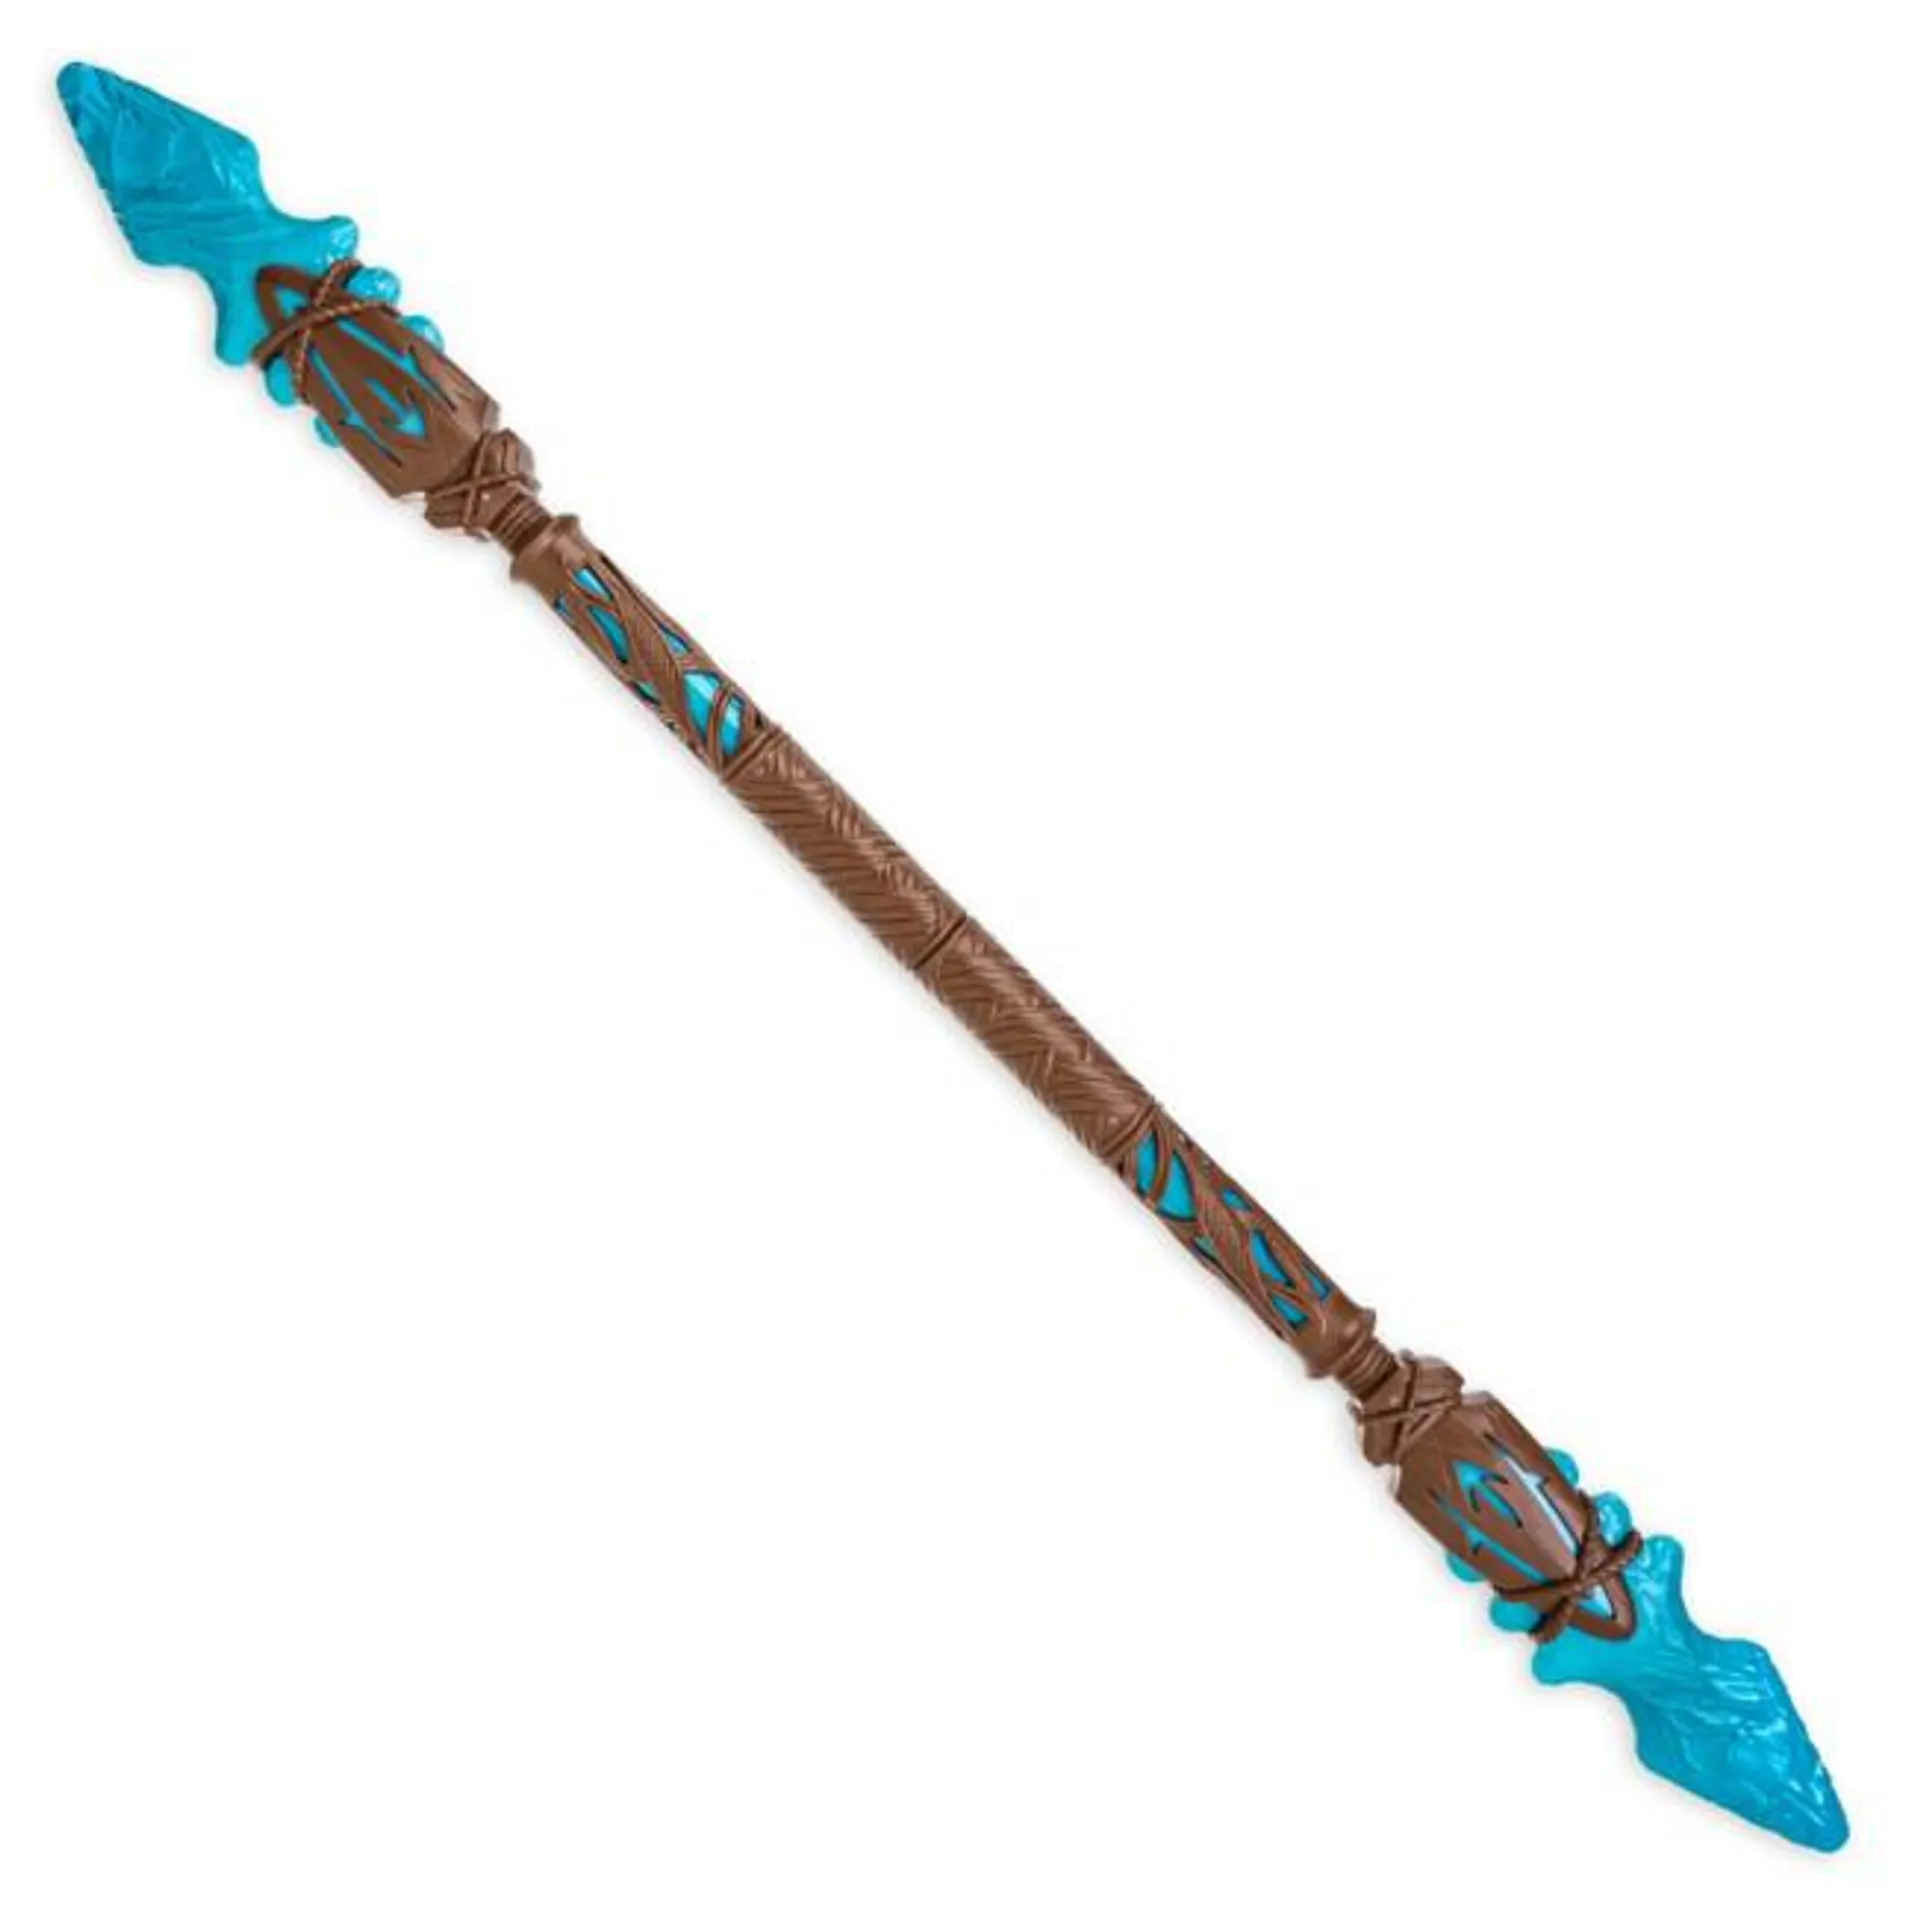 Disney Store Avatar: The Way of Water Light-Up Spear Toy